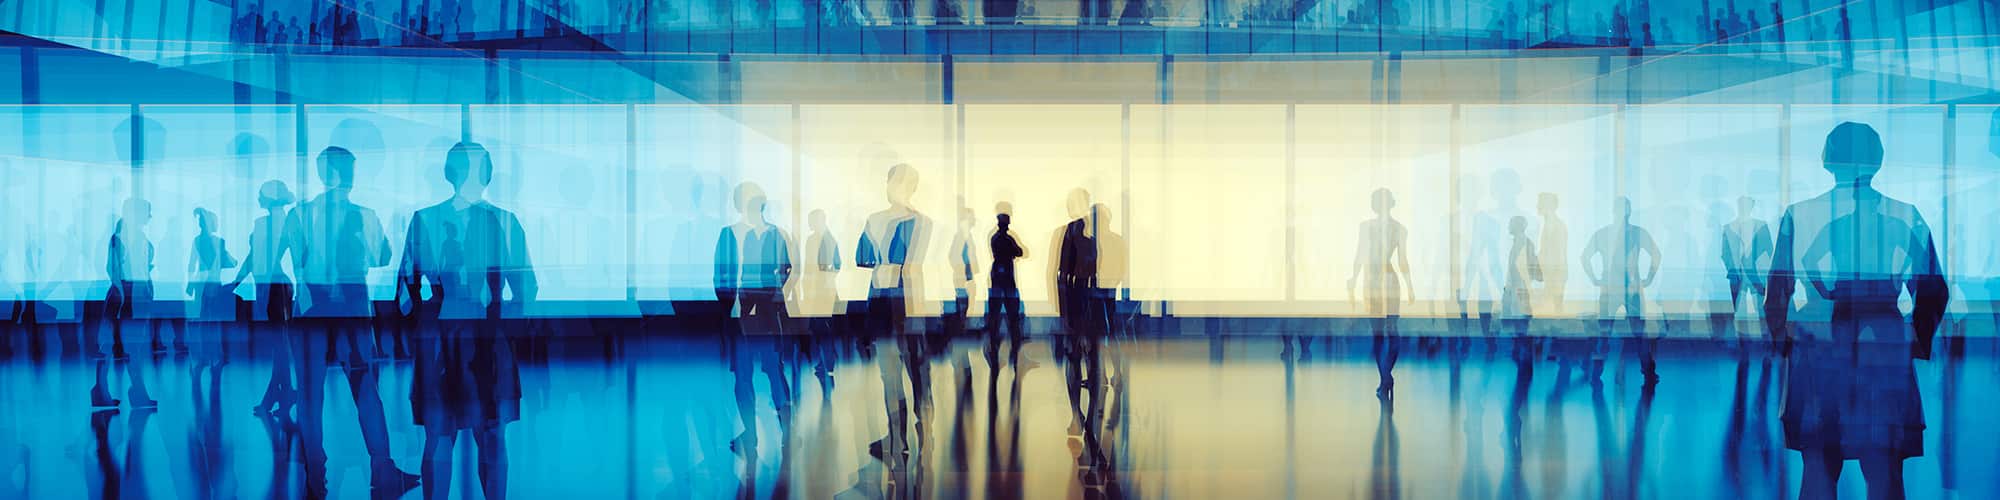 Transparent silhouettes of business professionals standing in an office setting